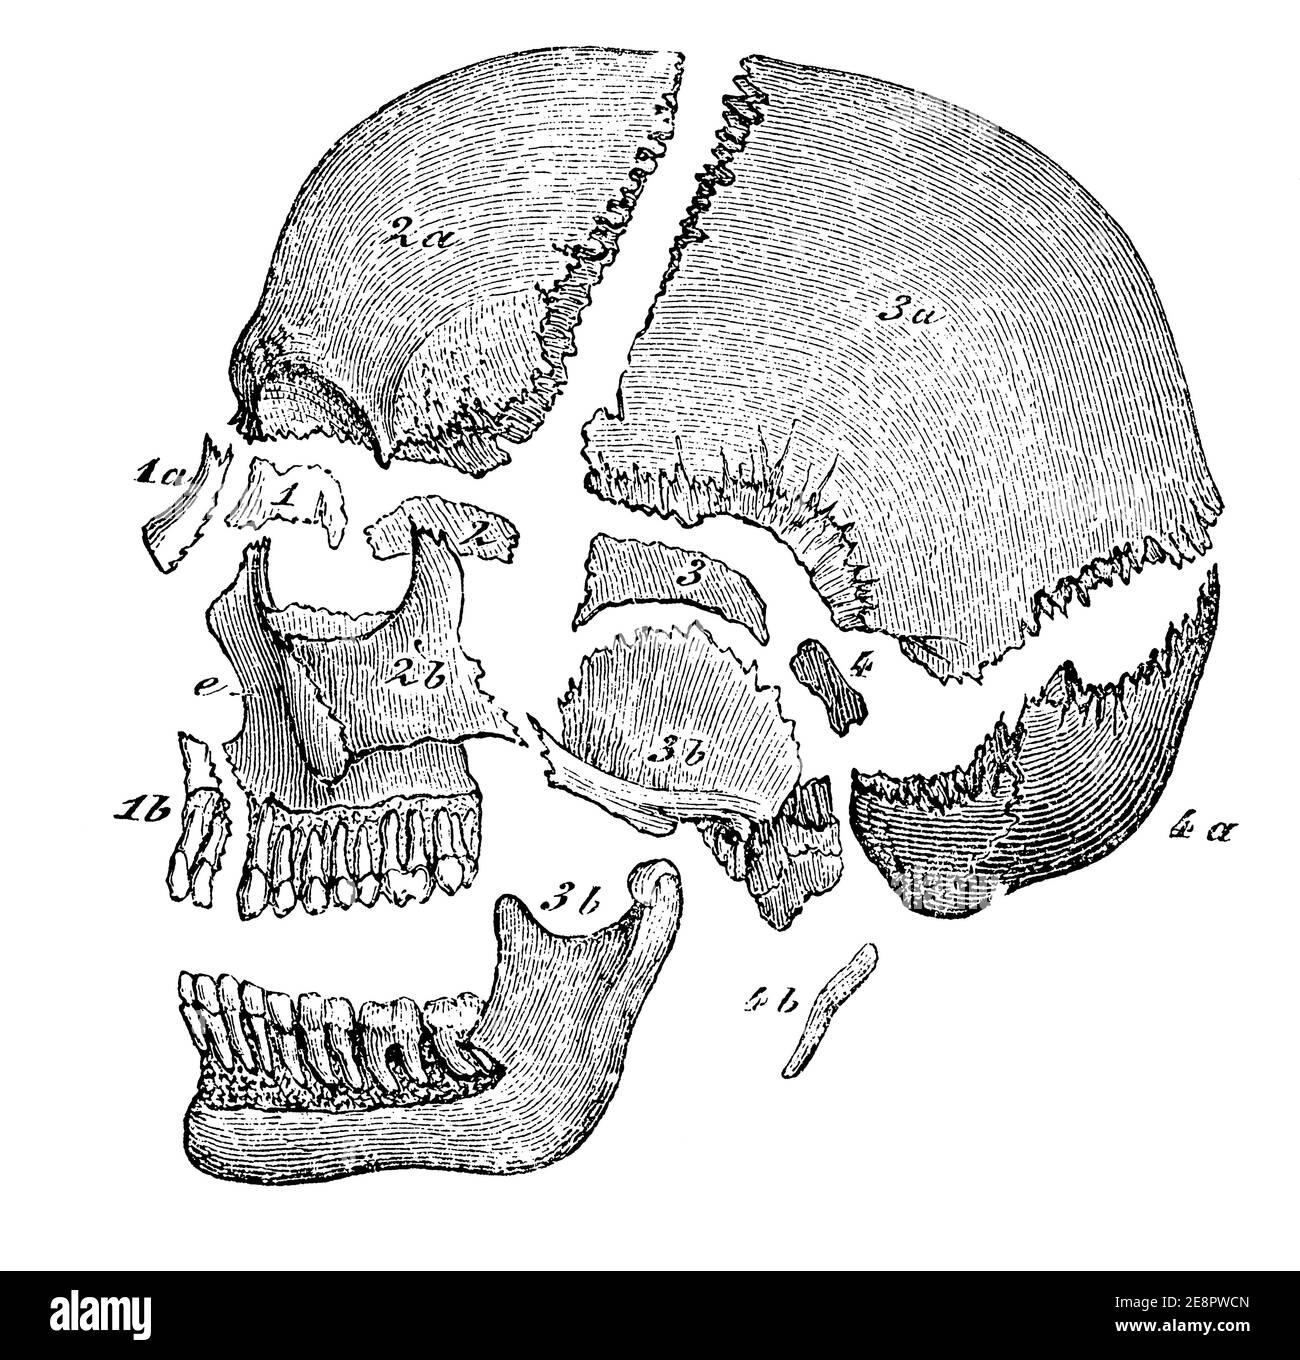 Skull bones. Shown separately with their seams for clarity. Illustration of the 19th century. Germany. White background. Stock Photo